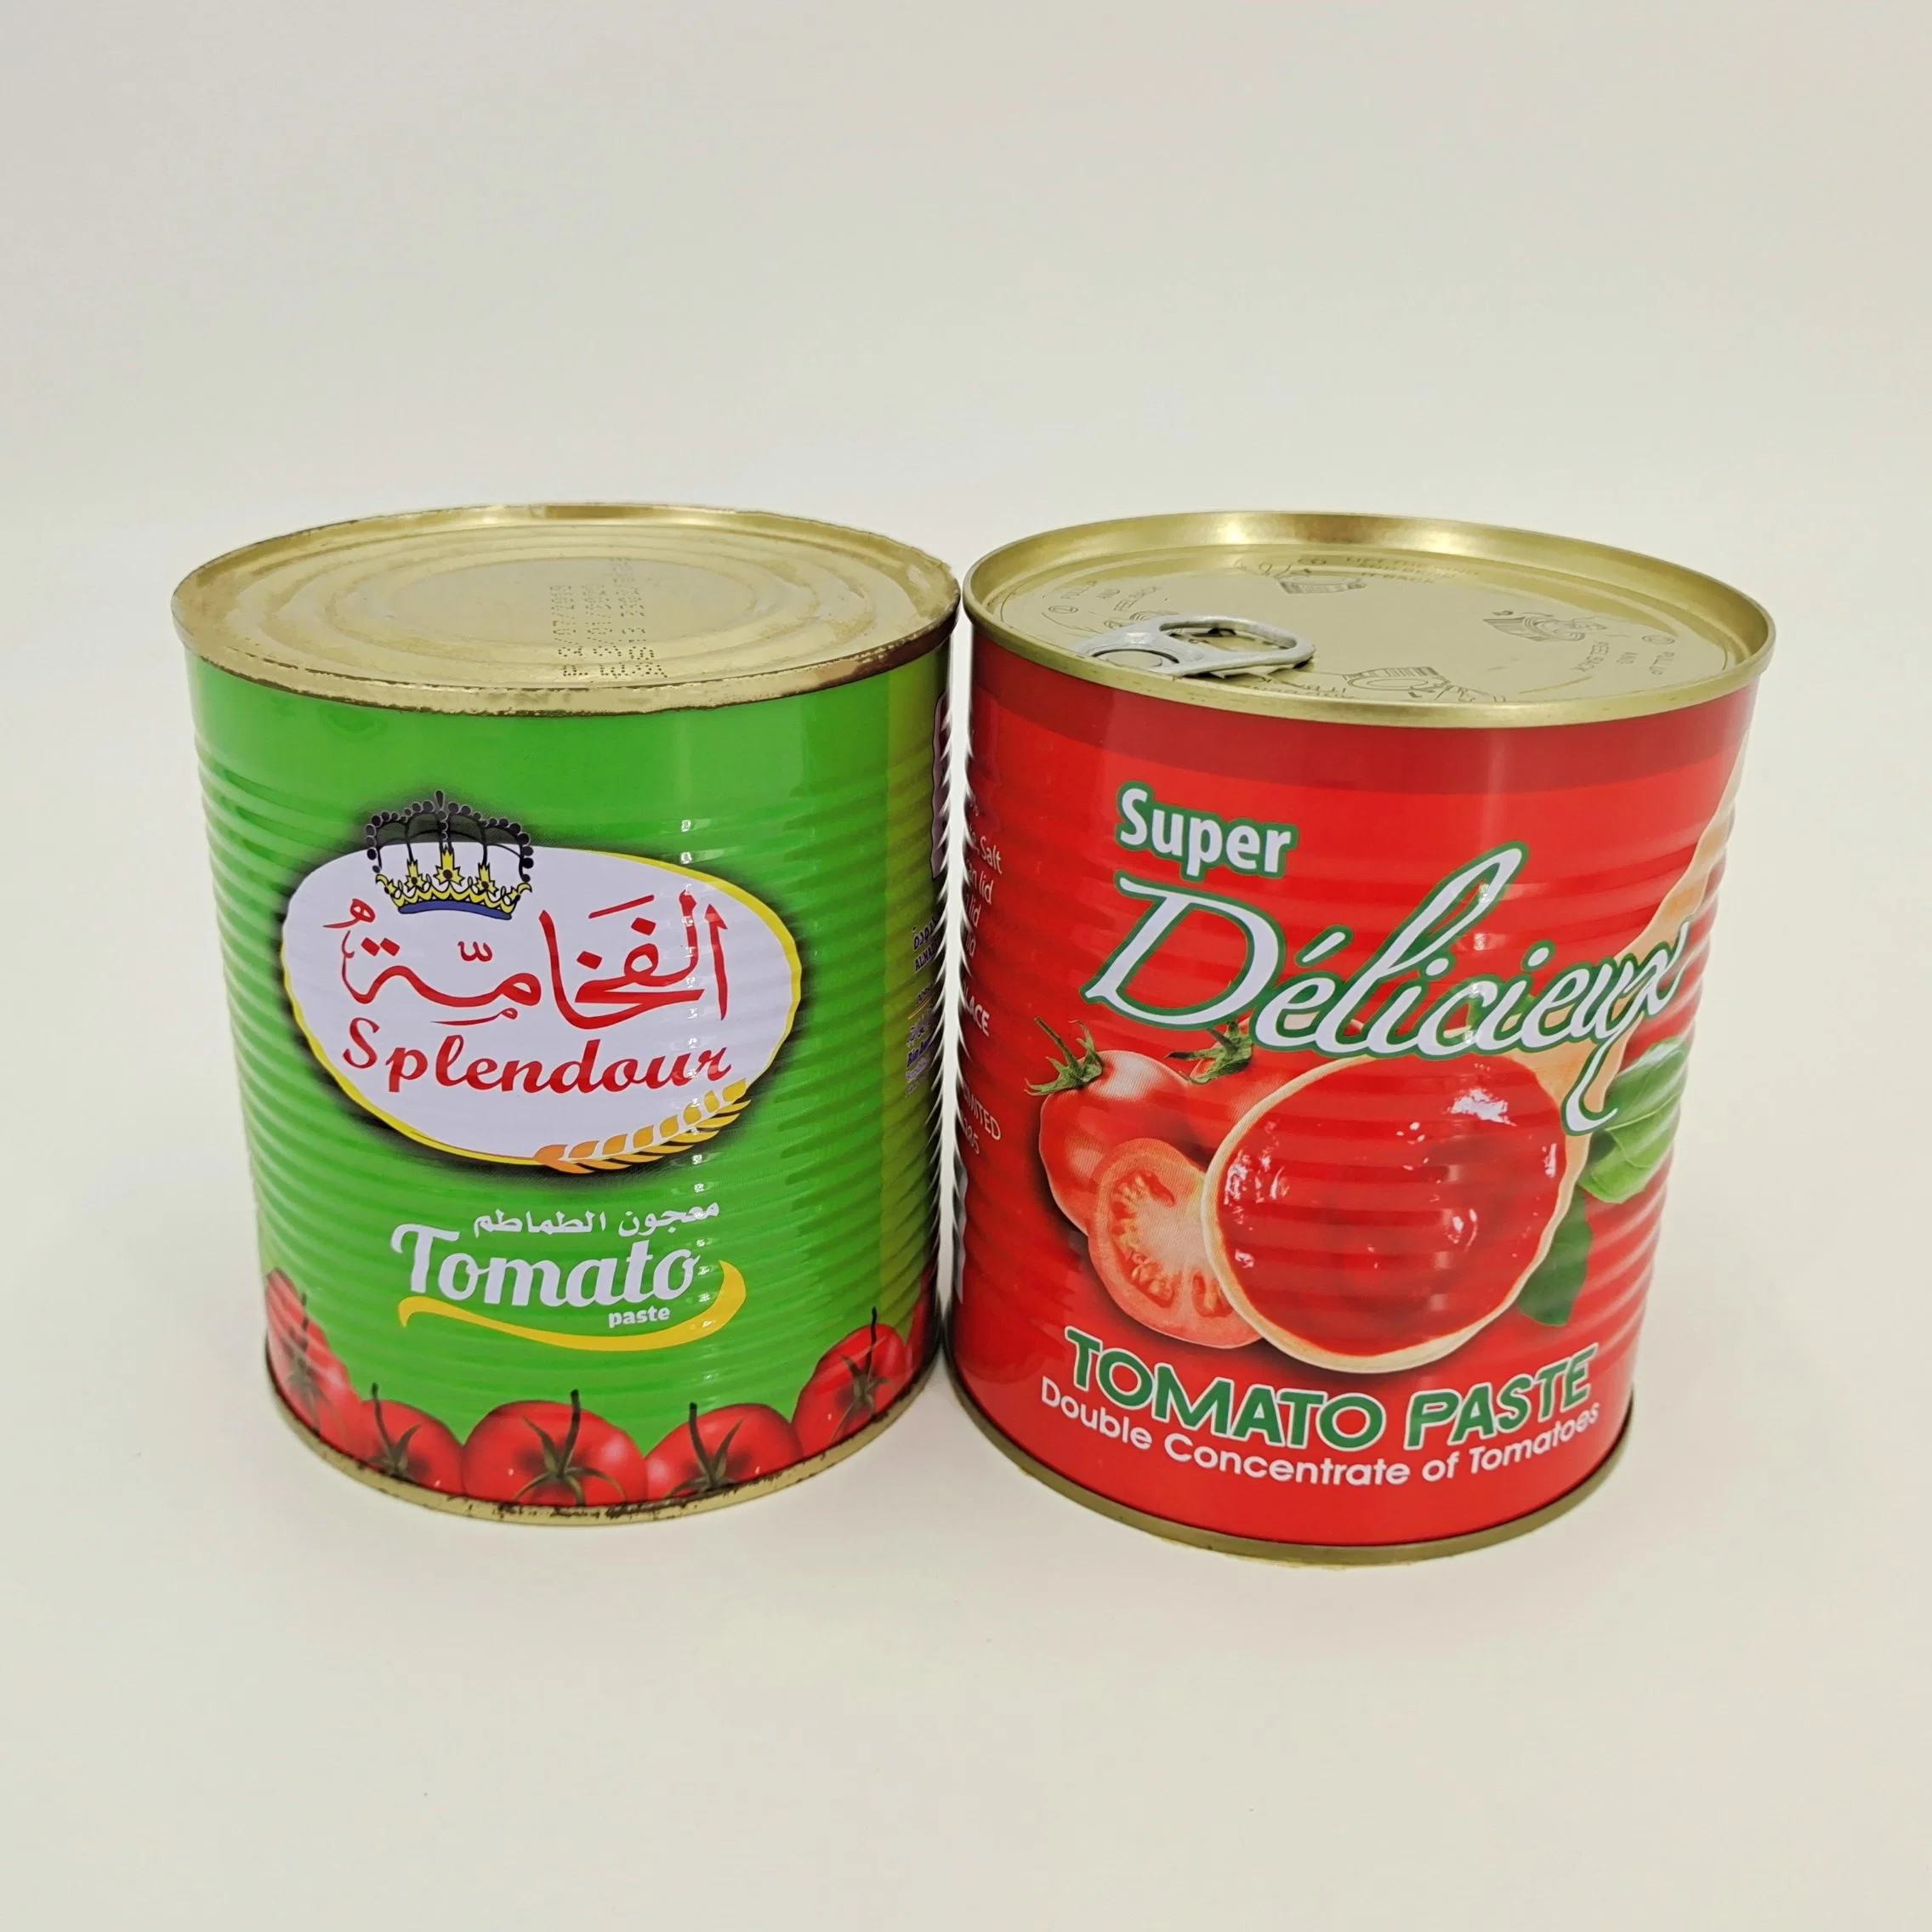 Competitive China Manufacturer of Canned Tomato Patste